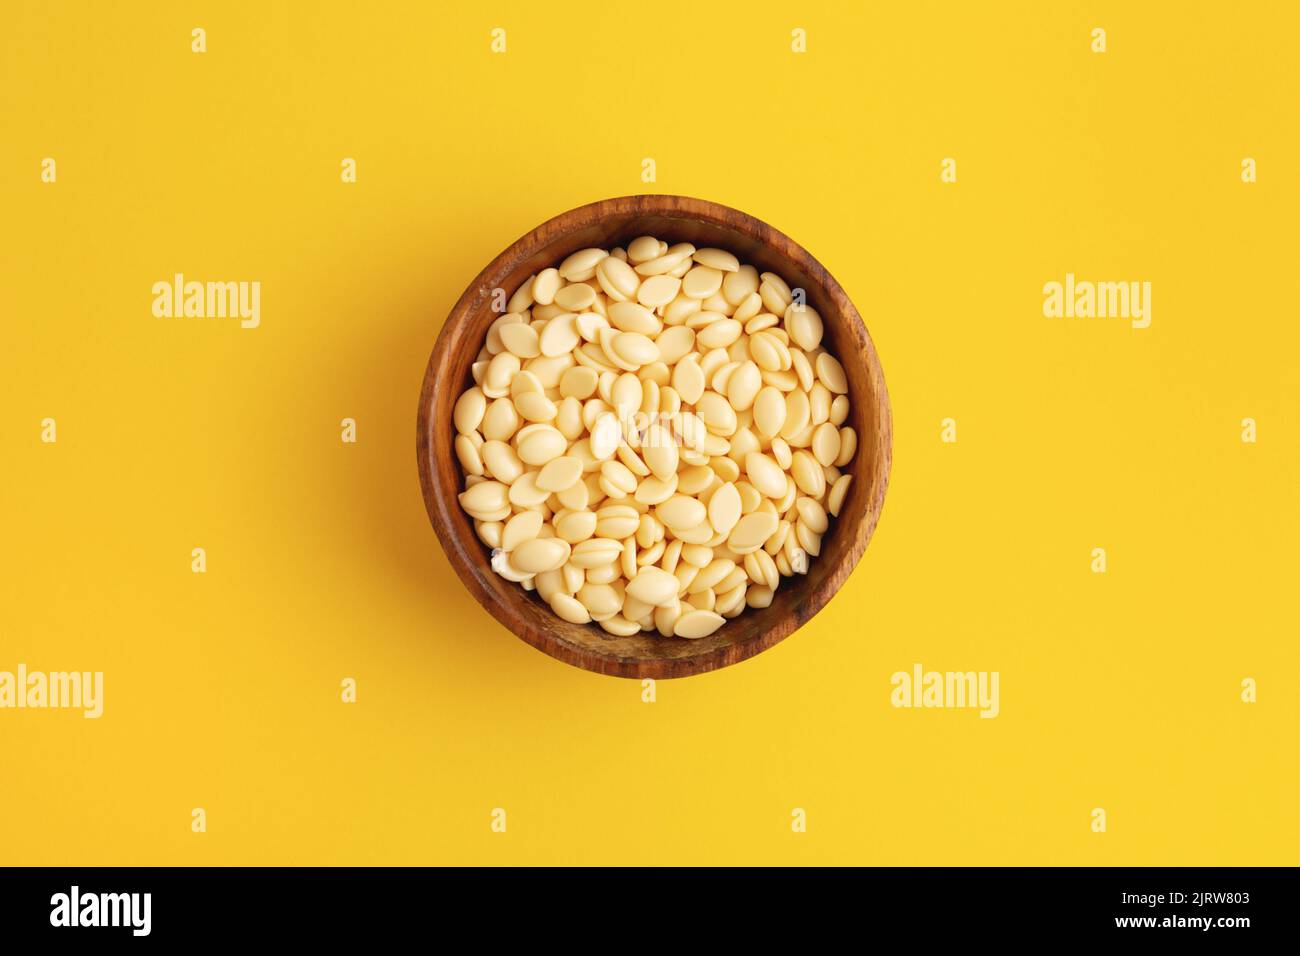 Depilatory film wax bean granules in a wooden bowl on yellow background. Cosmetics, hair removal. Stock Photo